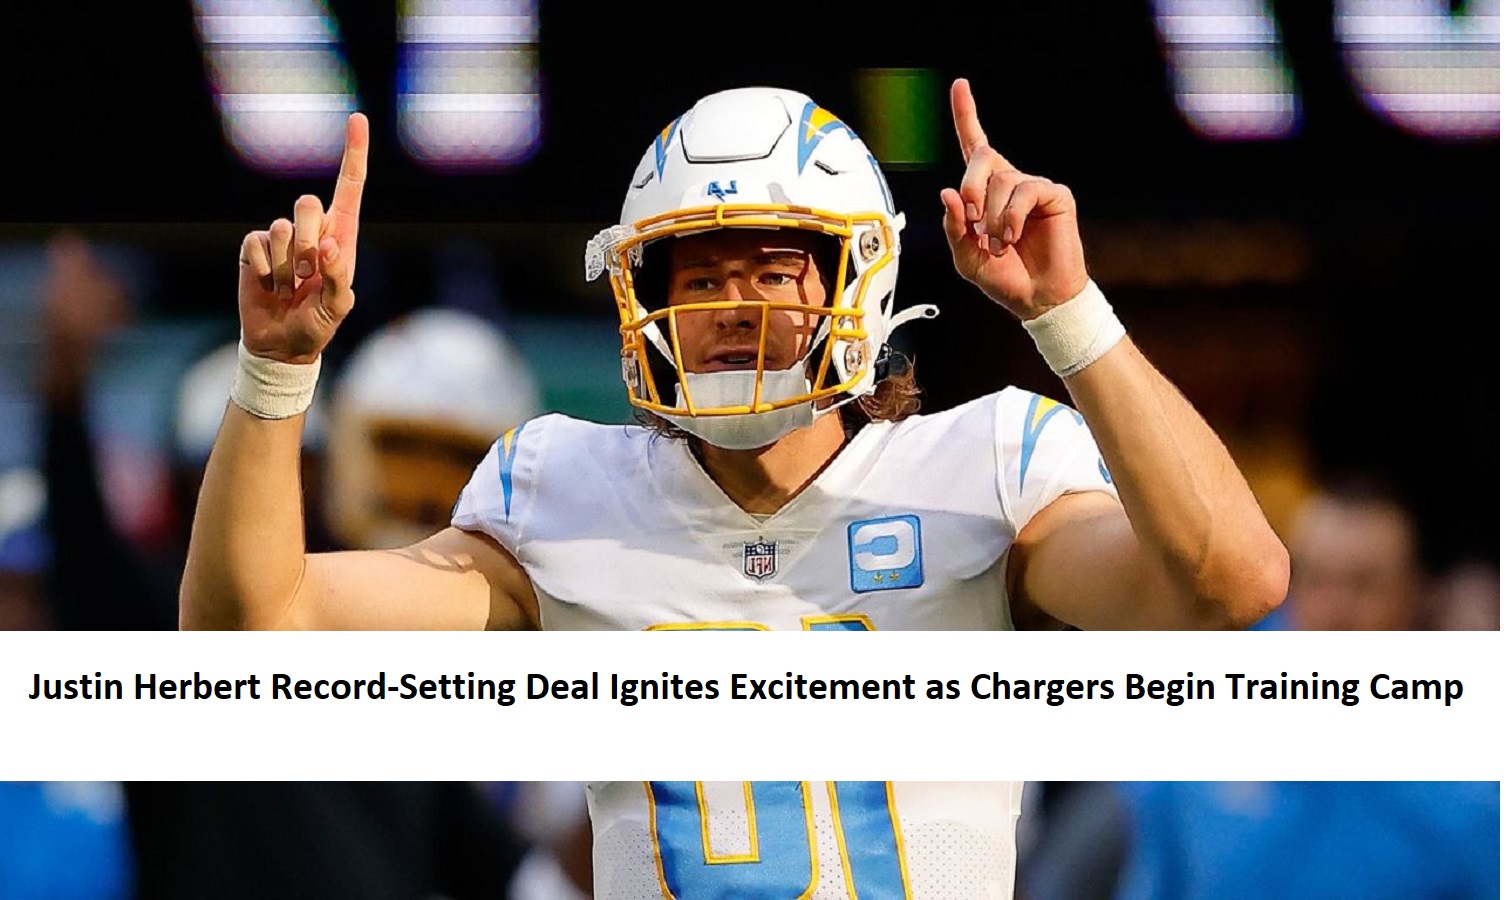 Justin Herbert Record-Setting Deal Ignites Excitement as Chargers Begin Training Camp